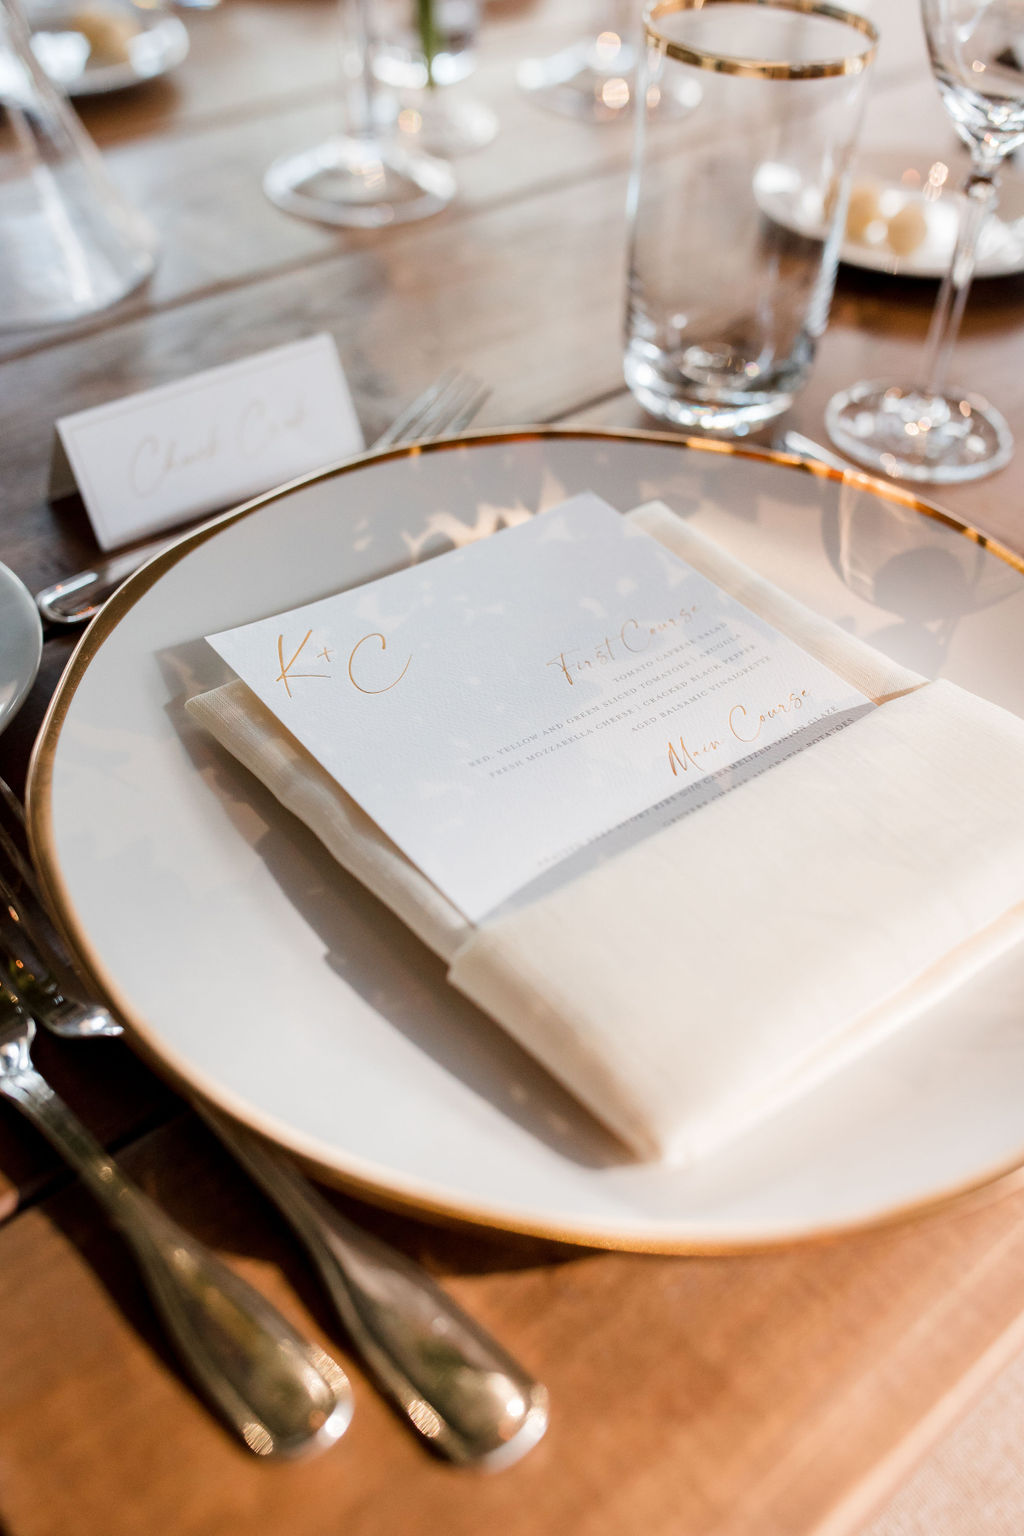 Ivory and gold wedding place setting